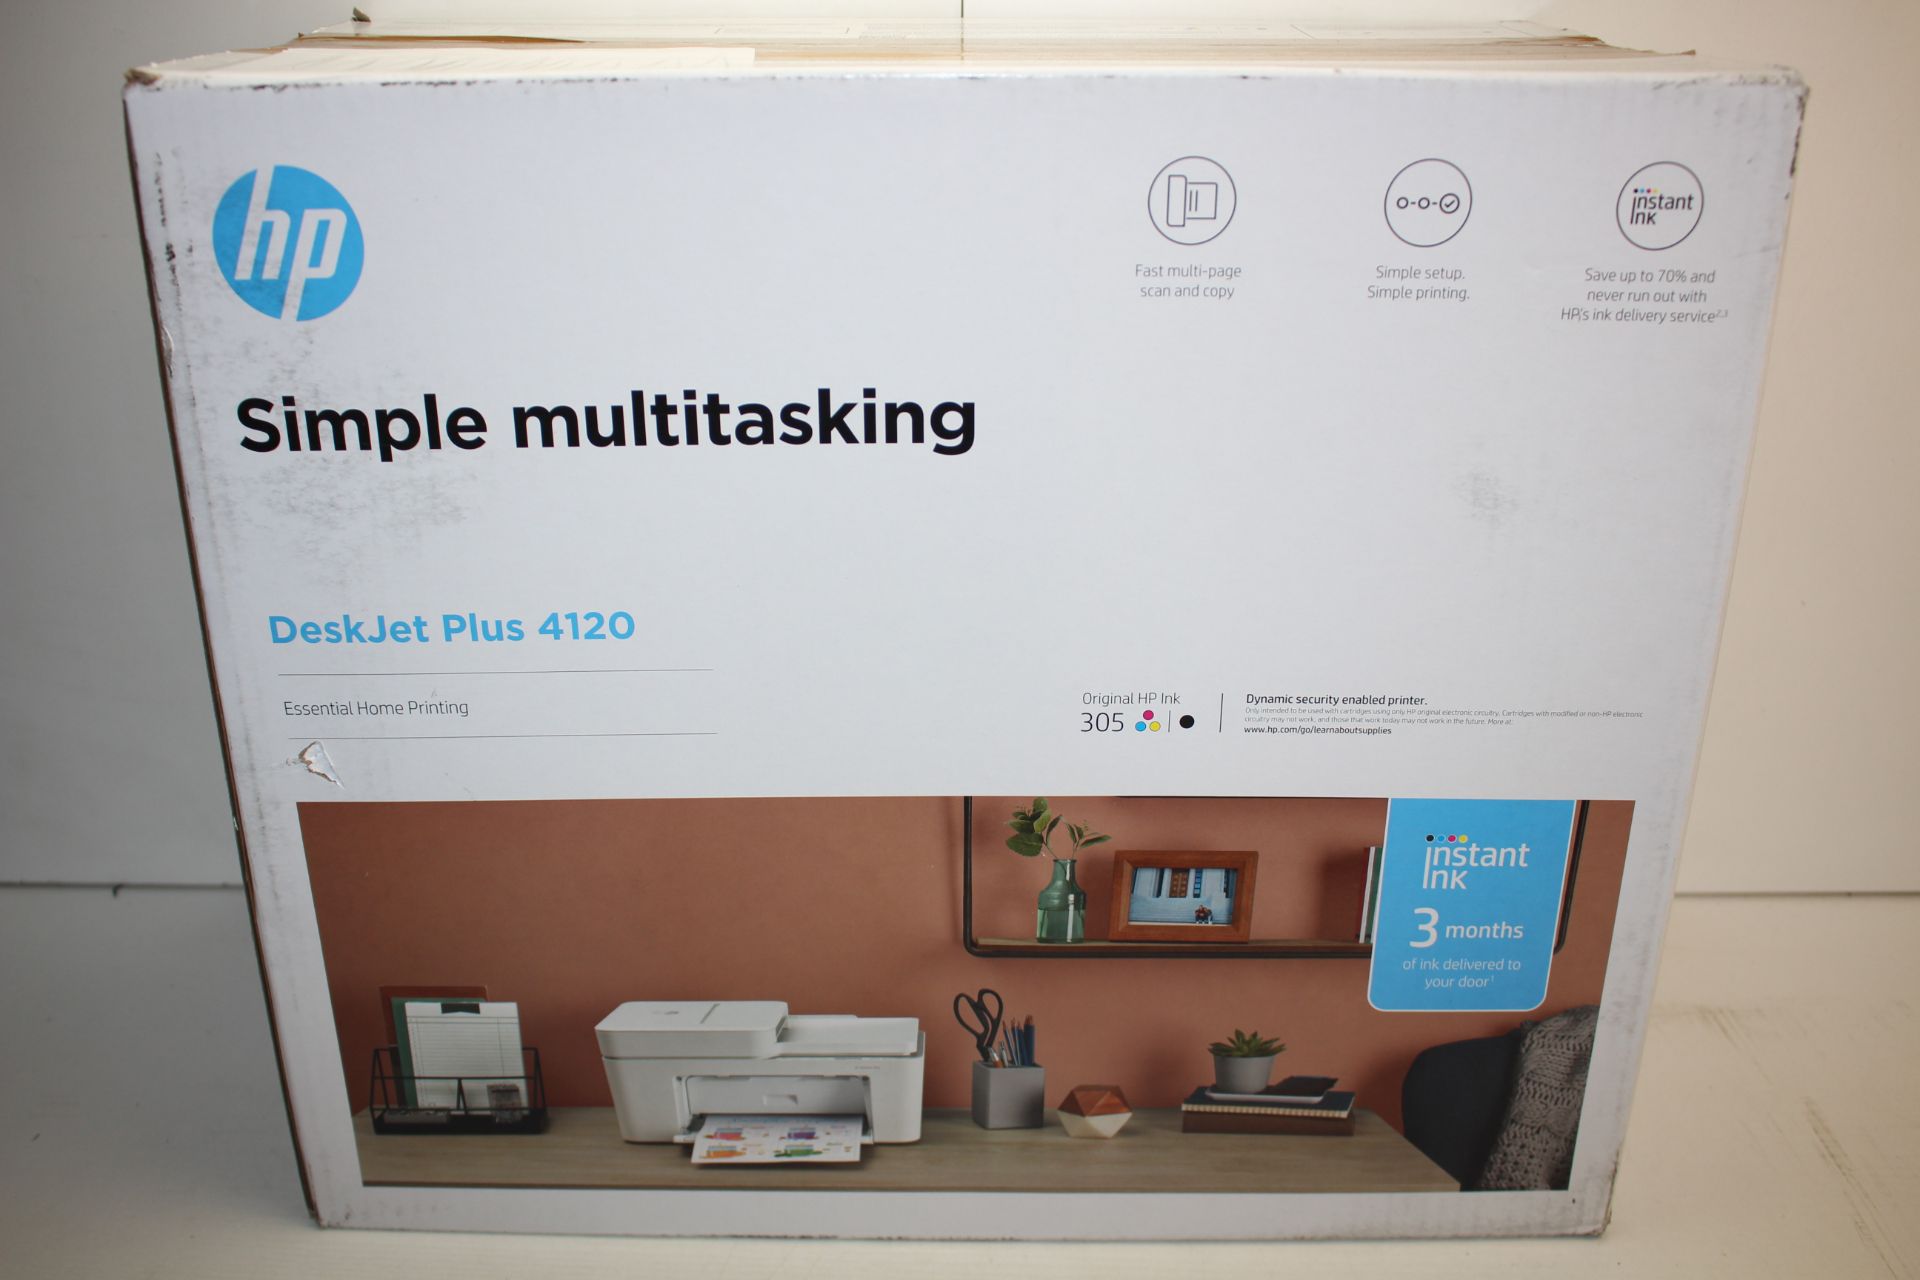 BOXED HP DESKJET 4120 PRINTER RRP £77.90Condition ReportAppraisal Available on Request- All Items